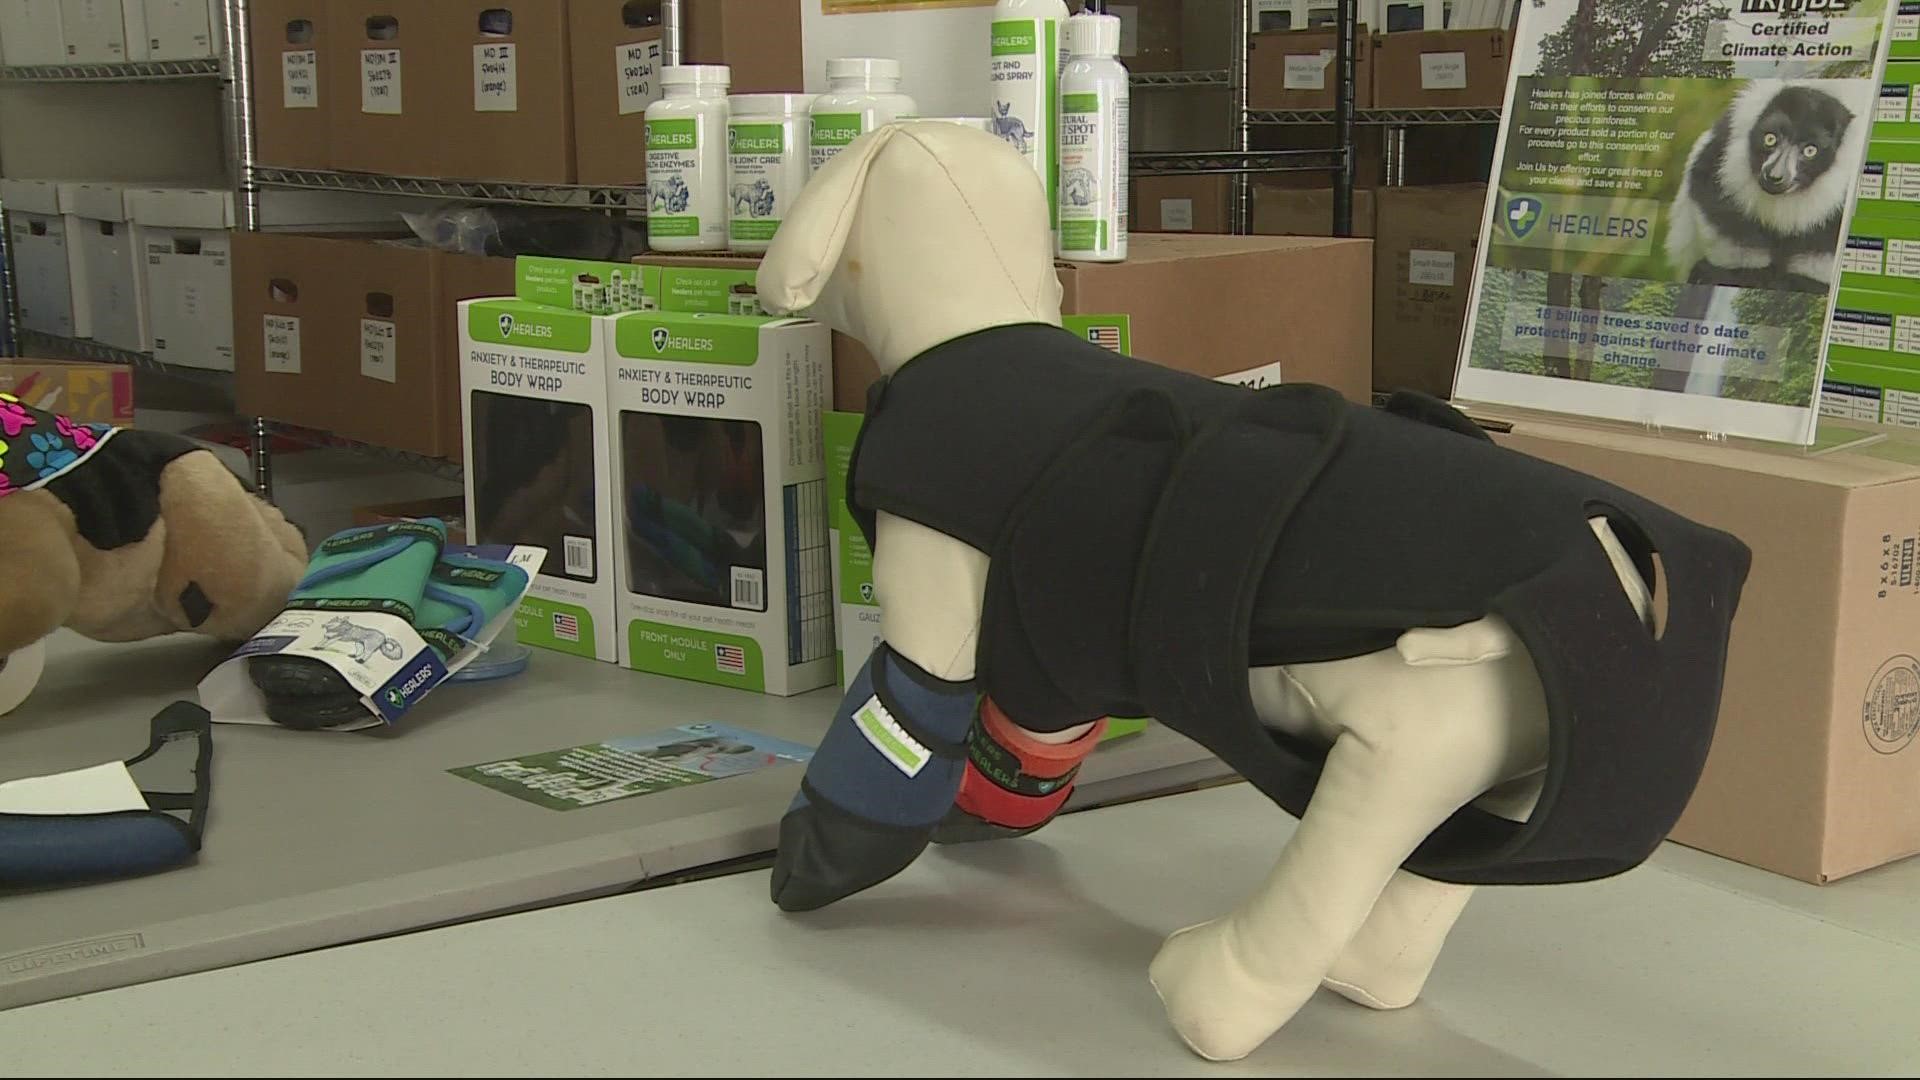 Healers Petcare makes anxiety wraps and paw-protecting booties for dogs, among other products. Its products will soon be sold by the nation's largest retailers.